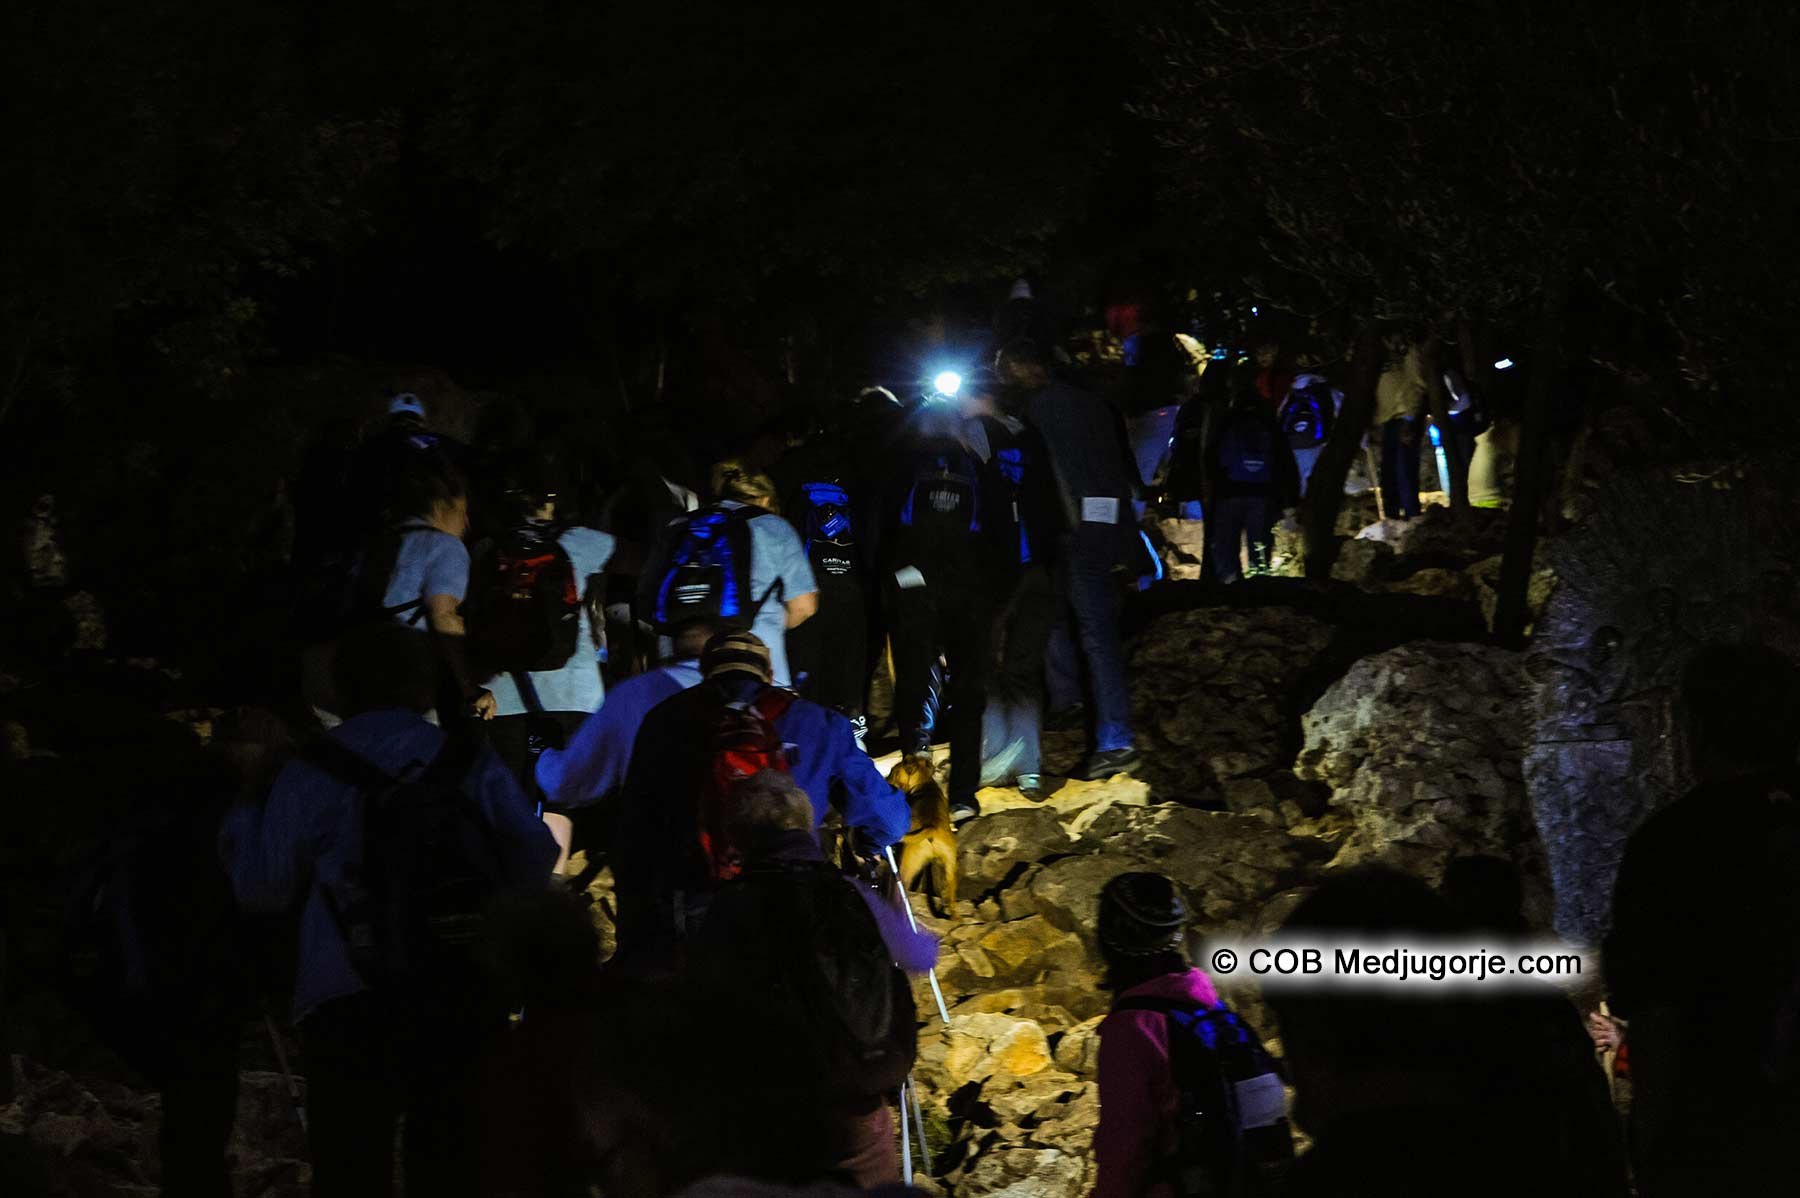 Pilgrims climbing Cross Mountain in the early morning hours